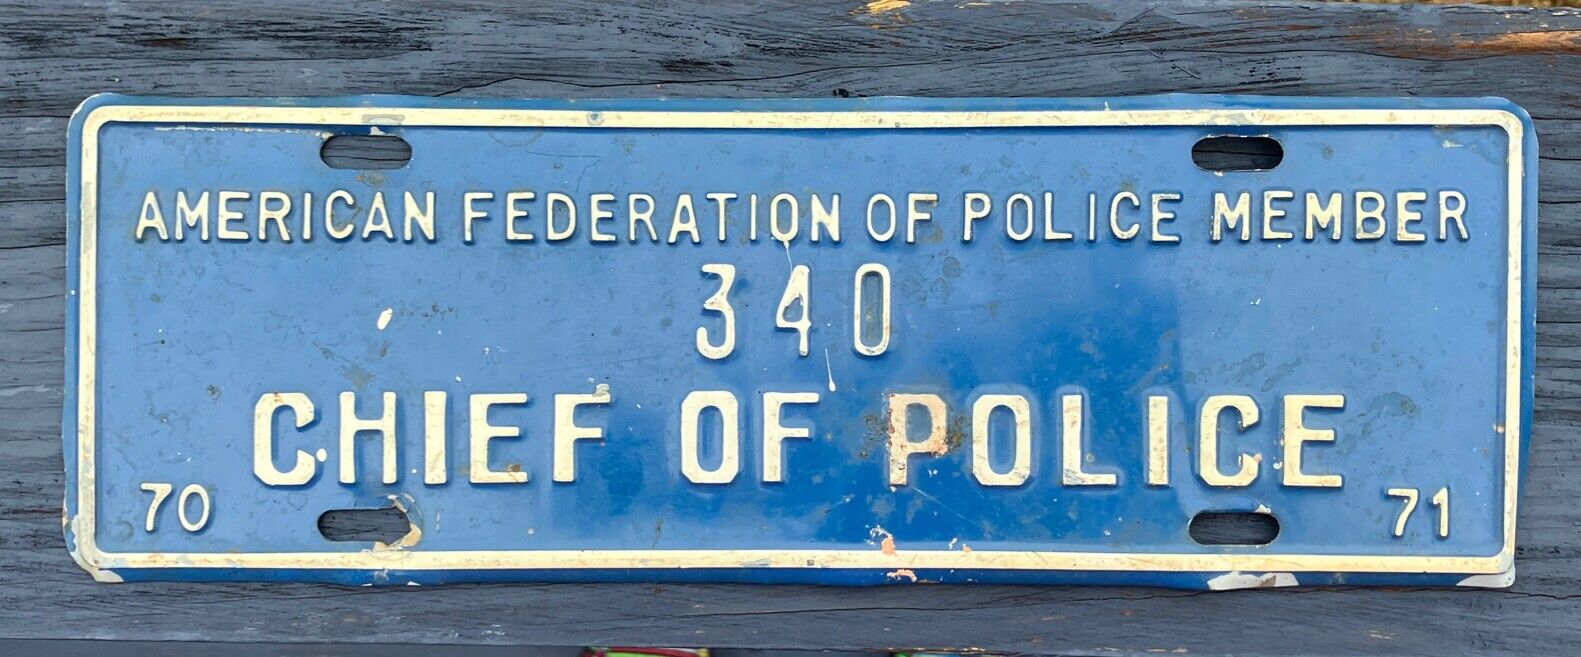 Chief Of Police License Plate Town Tag Topper American Federation 1970 - 71 Sign